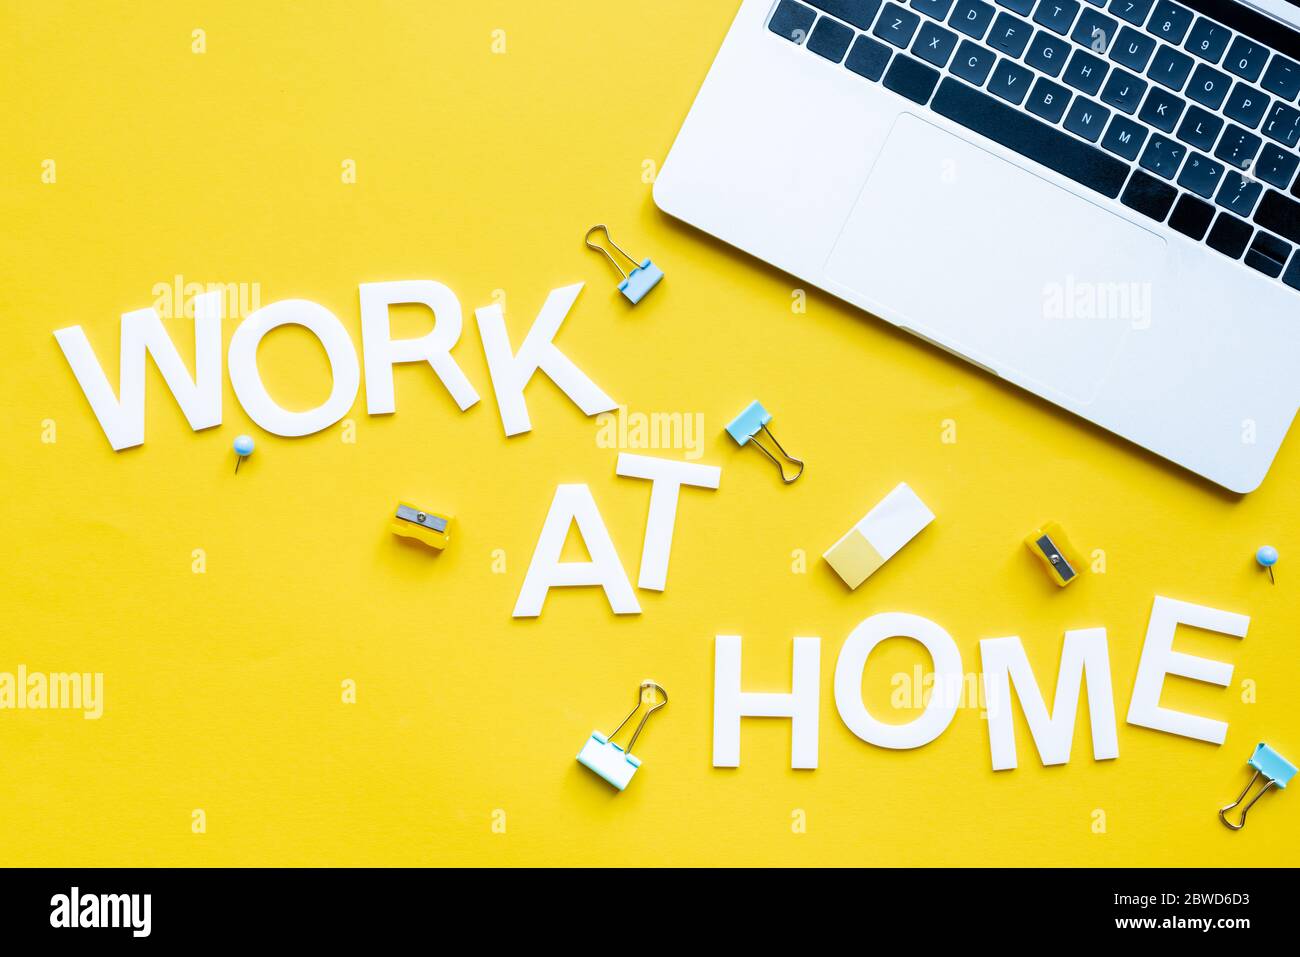 Top view of work at home lettering near laptop, binder clips and pencil sharpeners on yellow surface Stock Photo